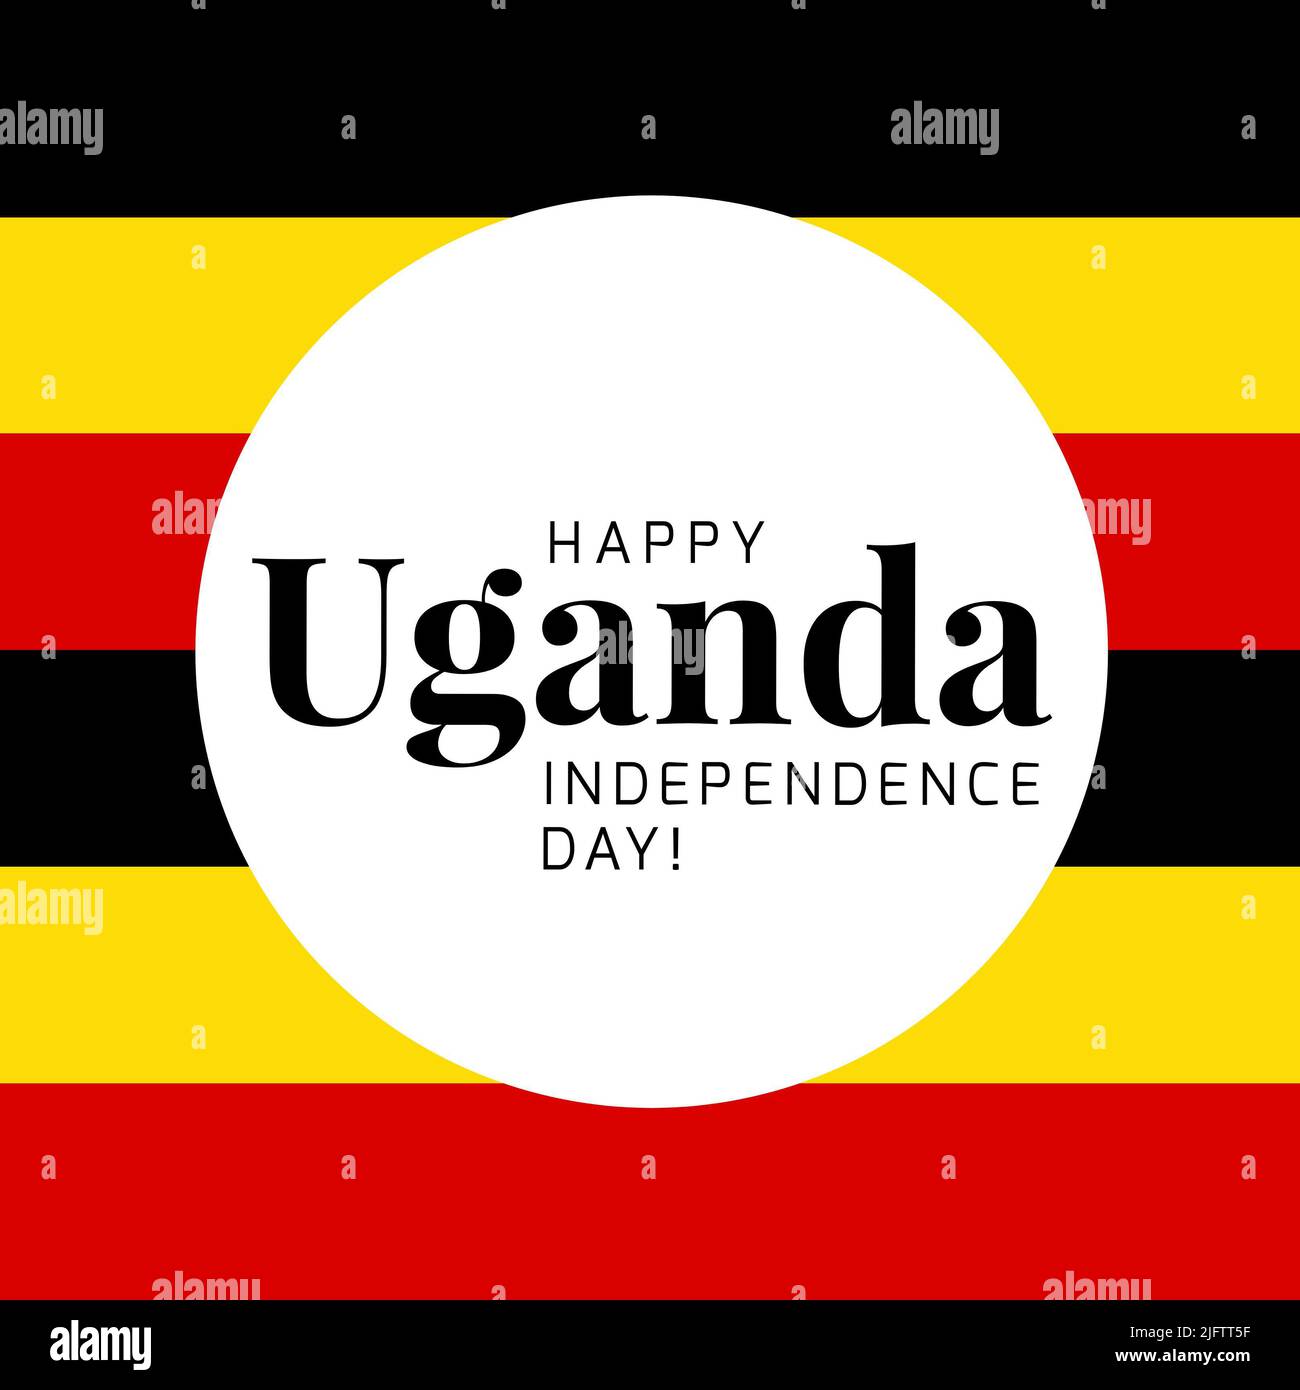 Happy uganda independence day text in white circle over black, yellow and red background Stock Photo